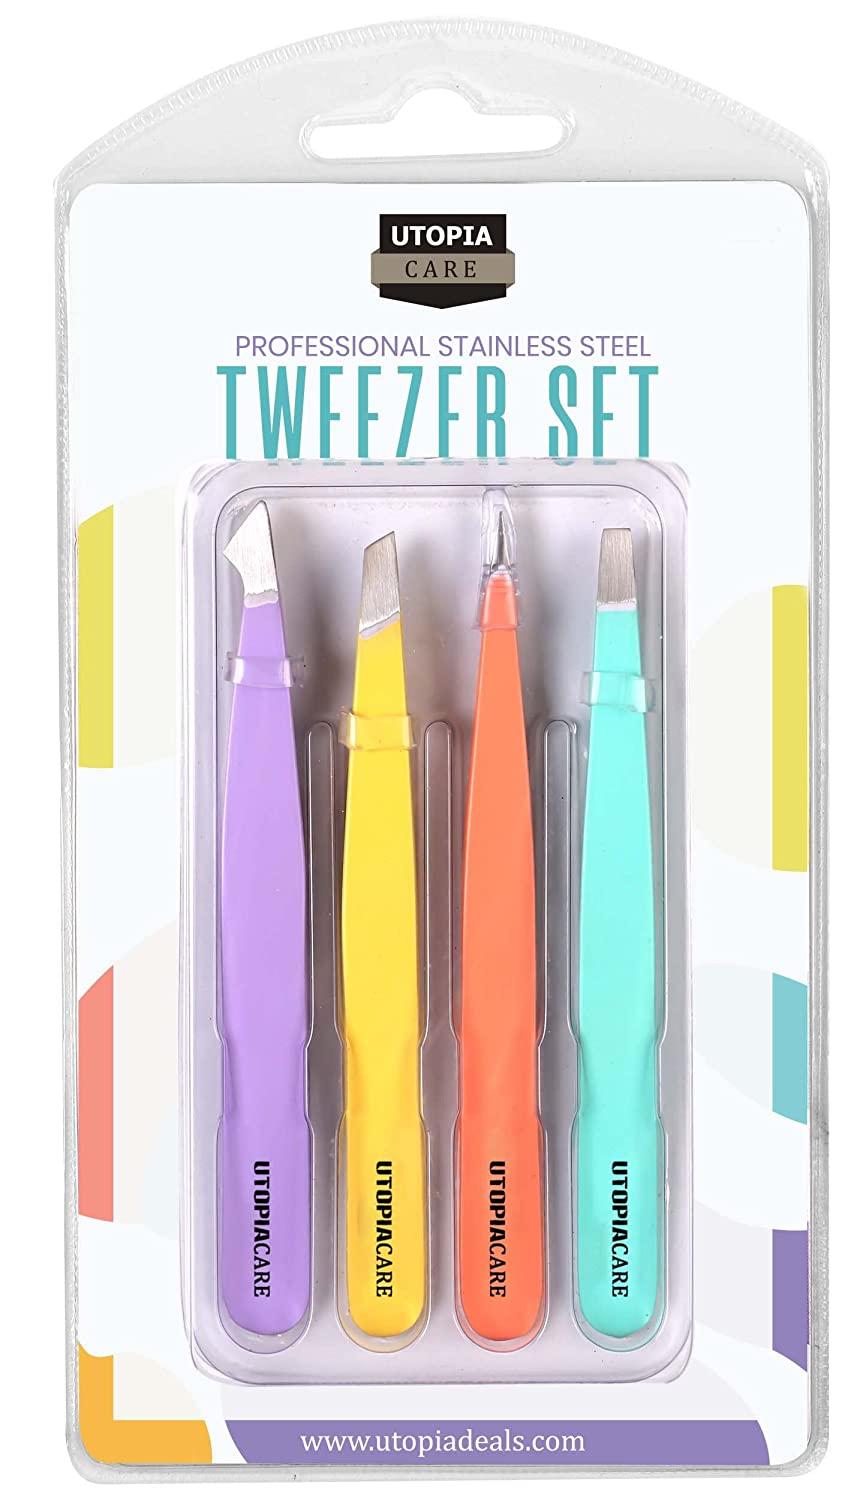 Utopia Care 4 Piece Professional Stainless Steel Tweezers Set - Health &  Beauty Items - Los Angeles, California, Facebook Marketplace